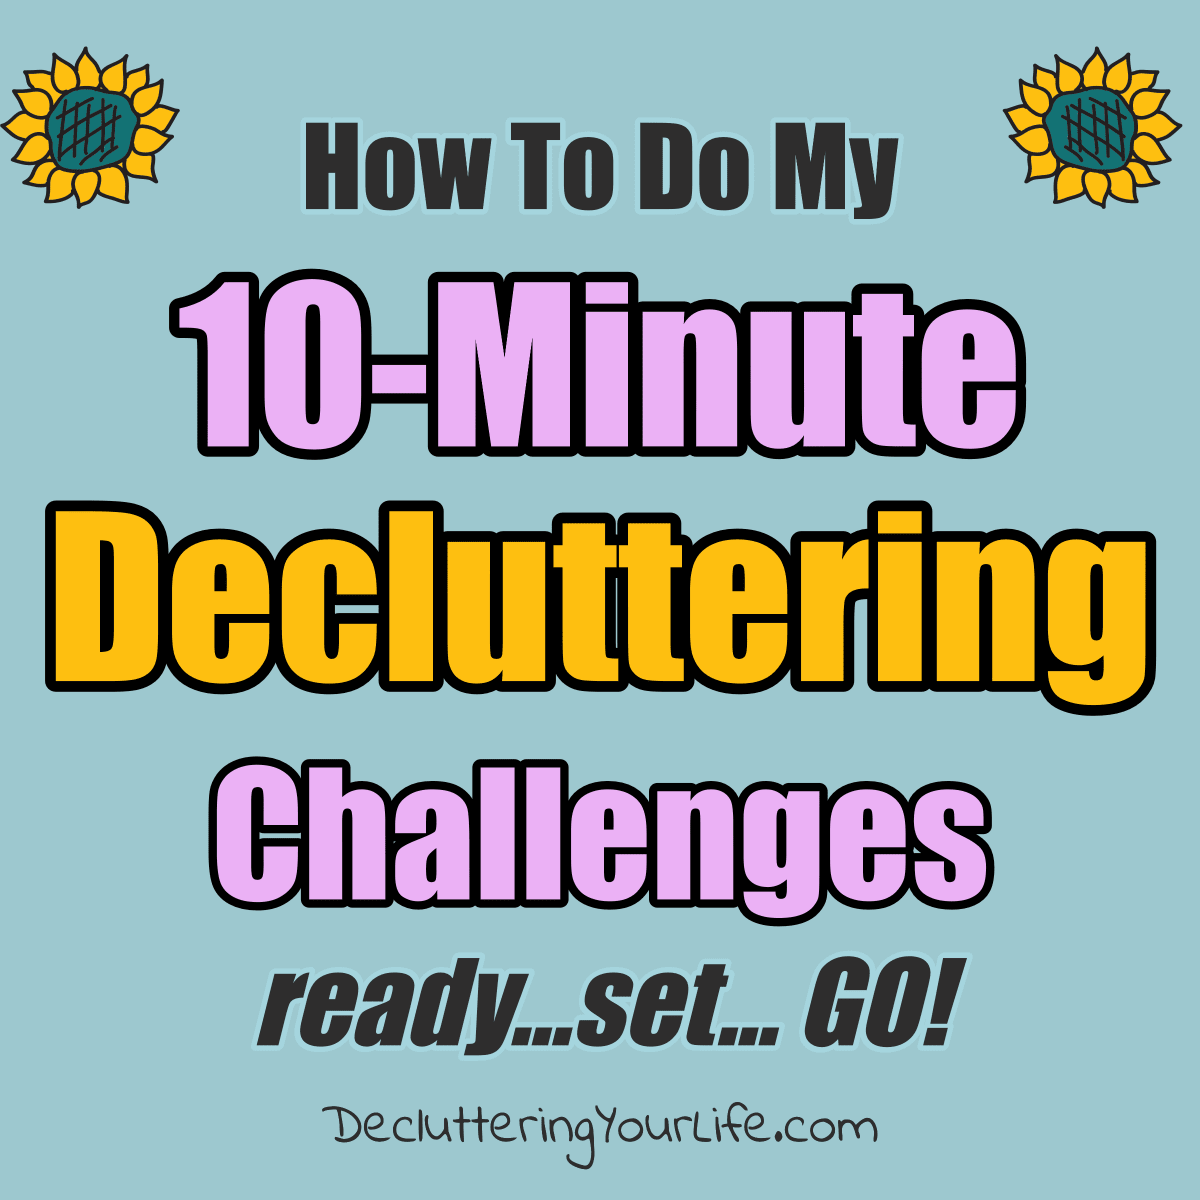 Declutter your home QUICKLY with my 10 minute decluttering challenges - they work!  Overwhelmed by clutter? Here's the fast way to declutter your home in only 10 minutes - here's how to do it